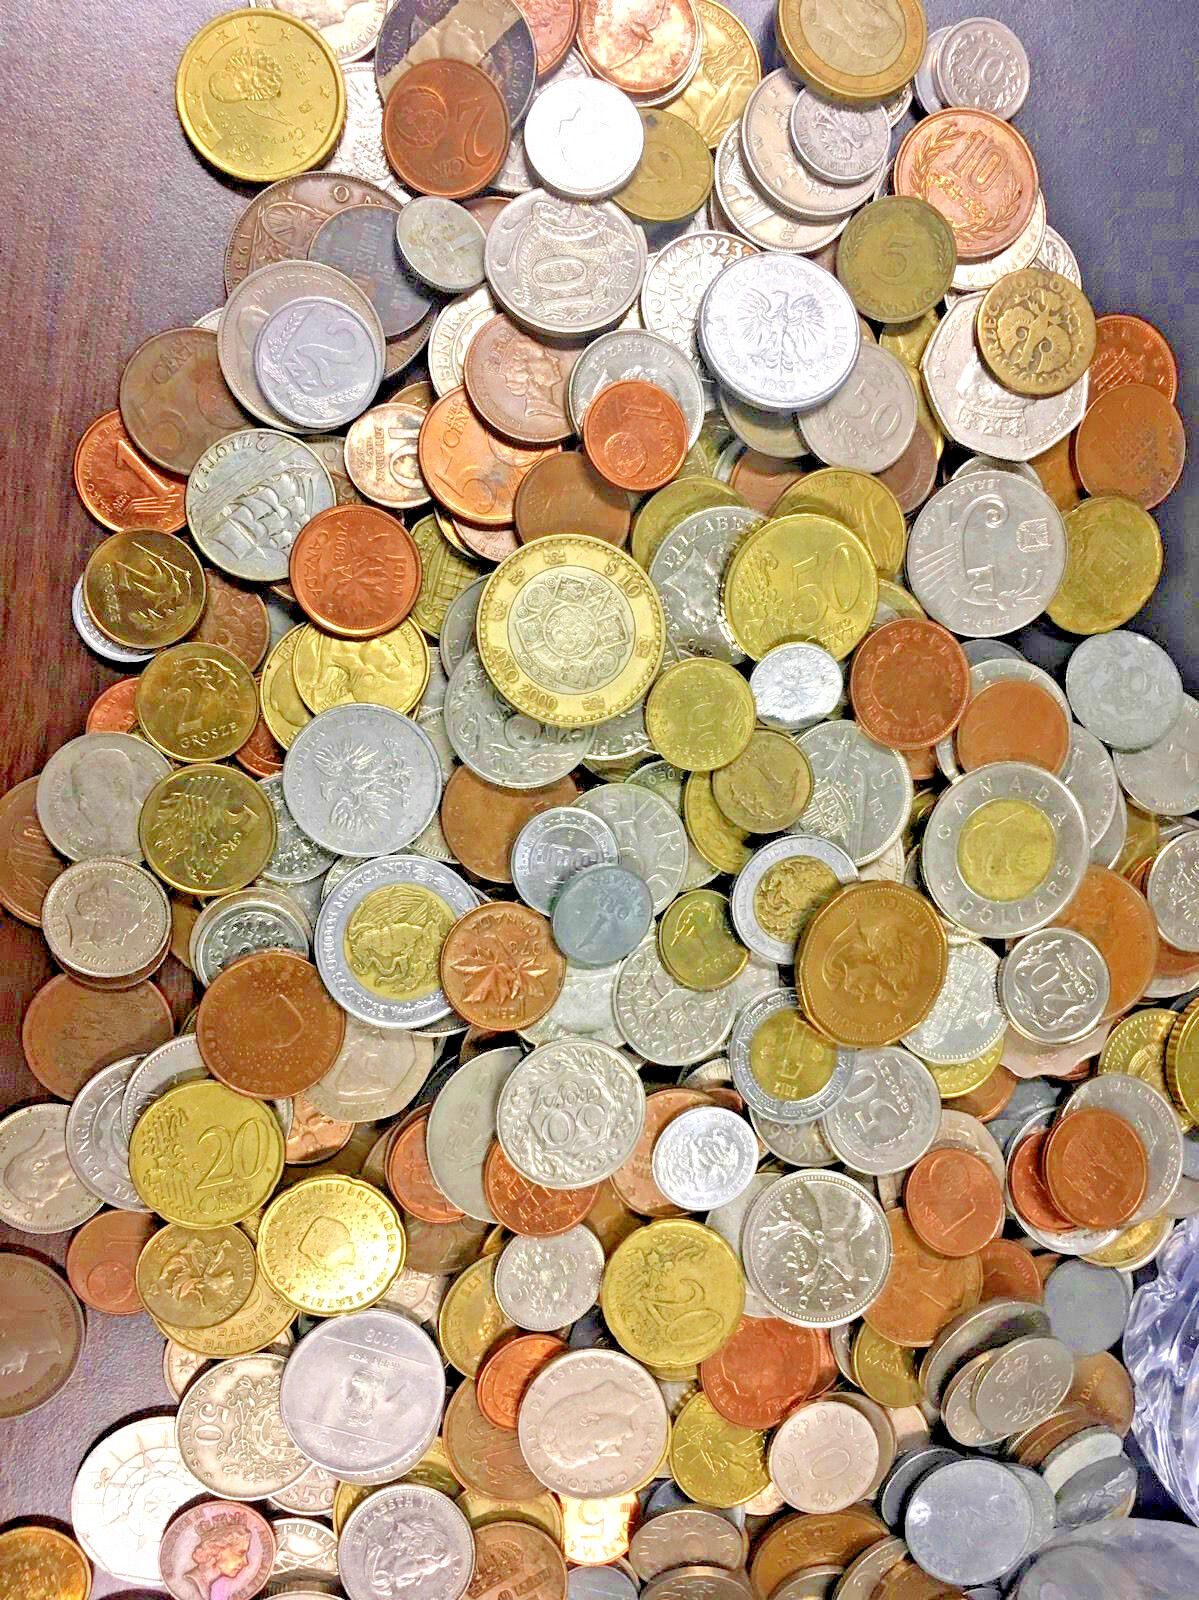 Bulk Lot 25 FOREIGN WORLD COINS No Duplicates in each Lots...